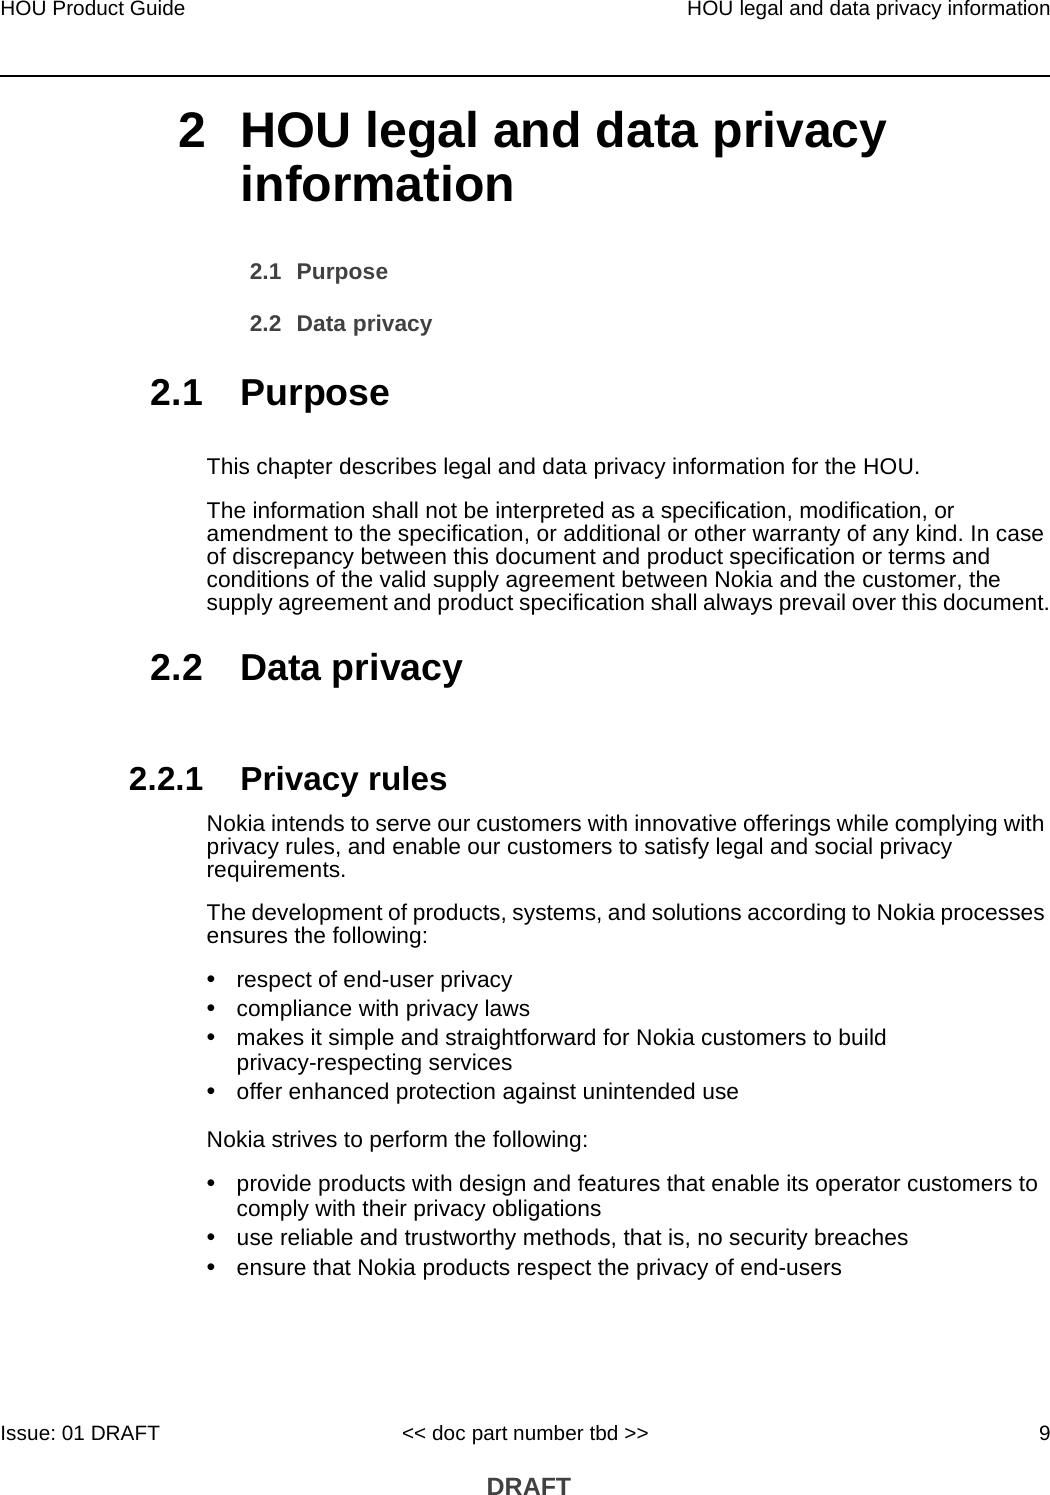 HOU Product Guide HOU legal and data privacy informationIssue: 01 DRAFT &lt;&lt; doc part number tbd &gt;&gt; 9 DRAFT2 HOU legal and data privacy information2.1 Purpose2.2 Data privacy2.1 PurposeThis chapter describes legal and data privacy information for the HOU.The information shall not be interpreted as a specification, modification, or amendment to the specification, or additional or other warranty of any kind. In case of discrepancy between this document and product specification or terms and conditions of the valid supply agreement between Nokia and the customer, the supply agreement and product specification shall always prevail over this document.2.2 Data privacy2.2.1 Privacy rulesNokia intends to serve our customers with innovative offerings while complying with privacy rules, and enable our customers to satisfy legal and social privacy requirements.The development of products, systems, and solutions according to Nokia processes ensures the following:•respect of end-user privacy•compliance with privacy laws•makes it simple and straightforward for Nokia customers to build privacy-respecting services•offer enhanced protection against unintended useNokia strives to perform the following:•provide products with design and features that enable its operator customers to comply with their privacy obligations•use reliable and trustworthy methods, that is, no security breaches•ensure that Nokia products respect the privacy of end-users